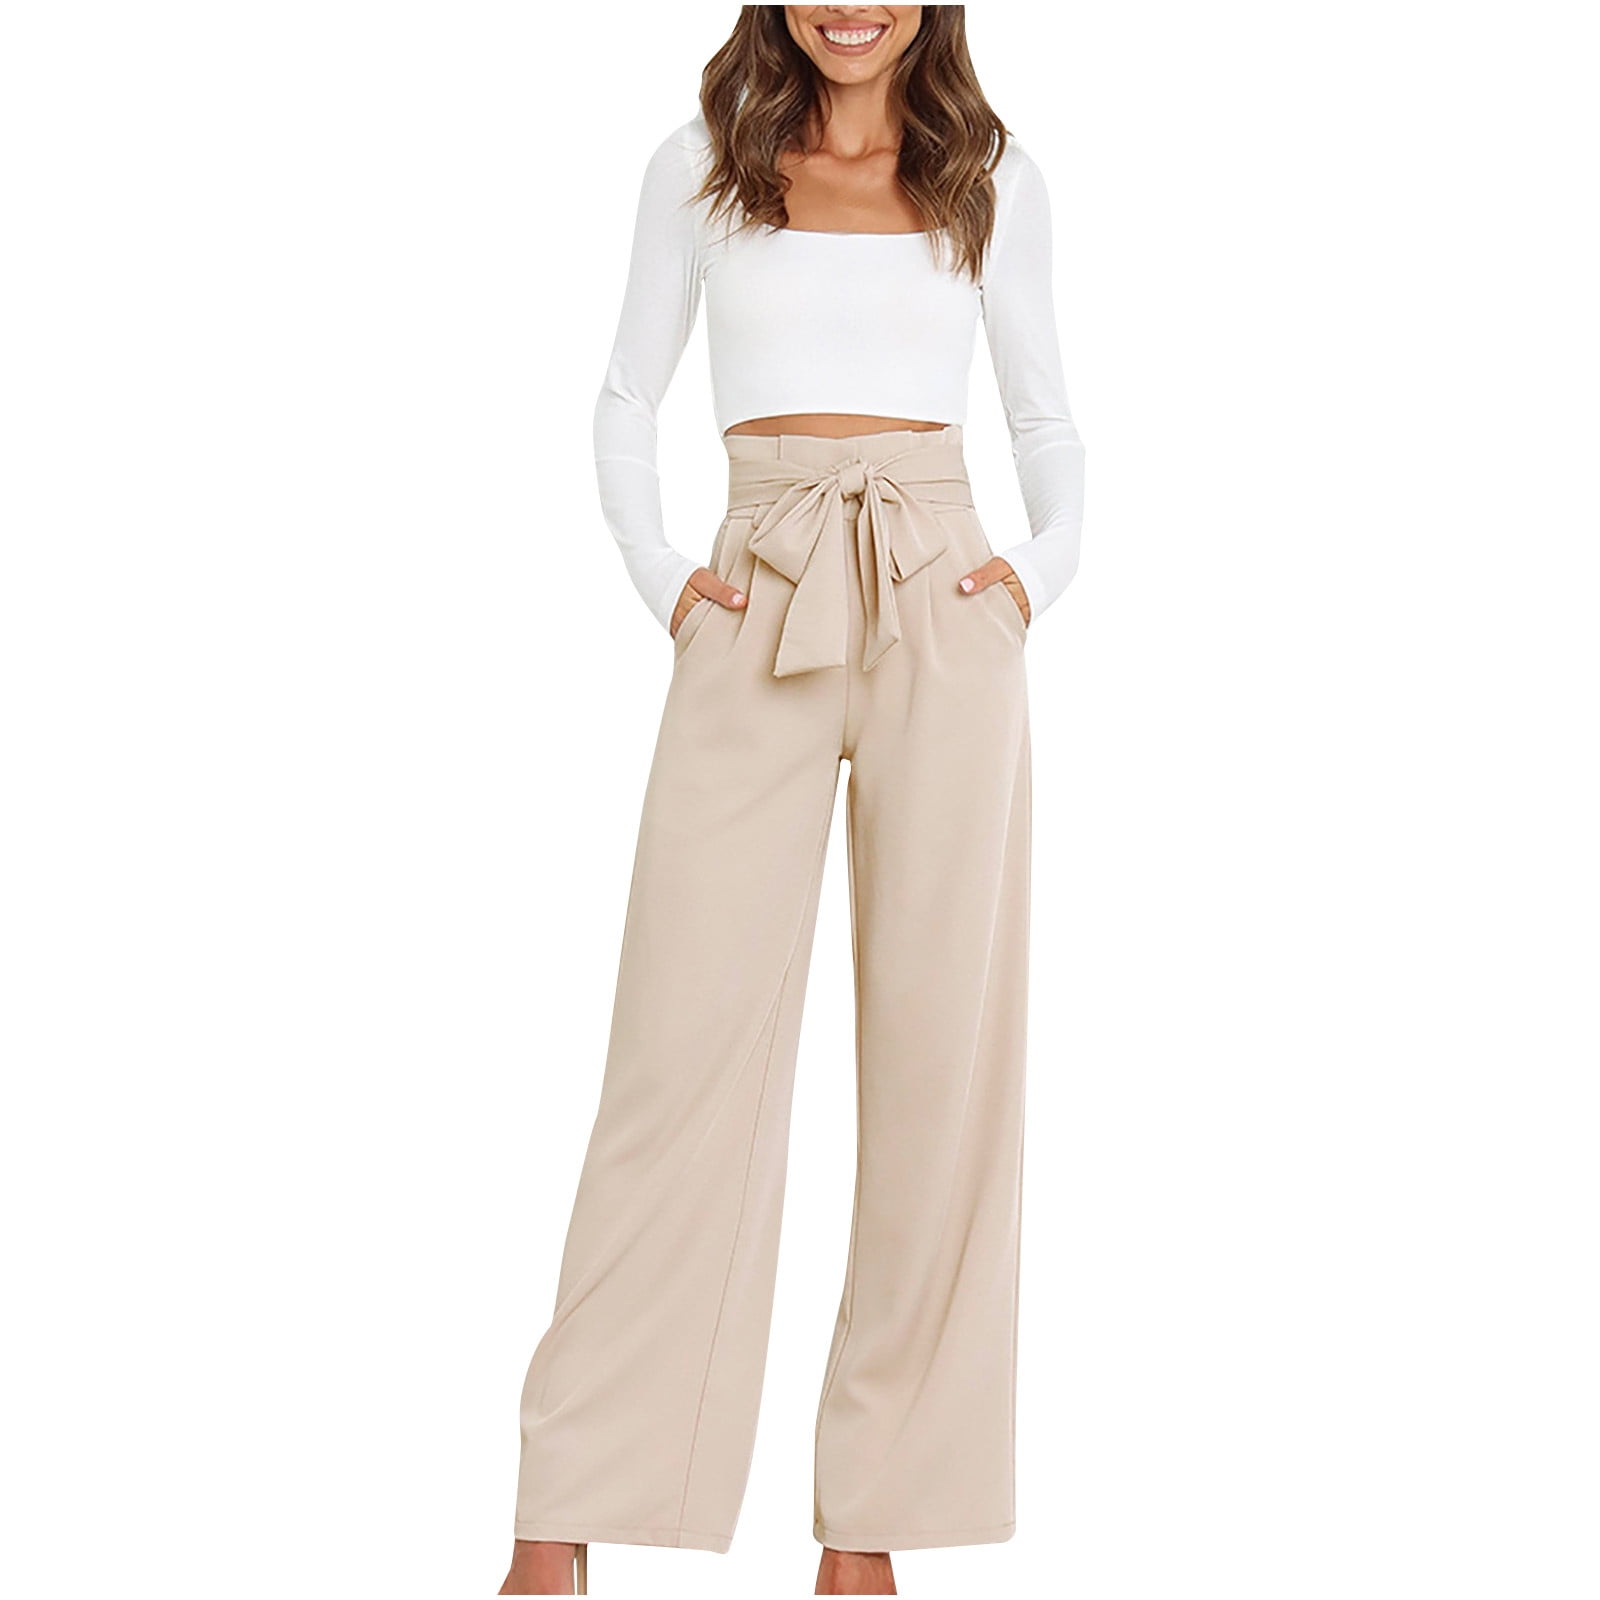 Chiclily Women's Belted Wide Leg Pants with Pockets Lightweight High Waisted  Adjustable Tie Knot Loose Trousers Flowy Summer Beach Lounge Pants, US Size  XL in Wheat - Walmart.com